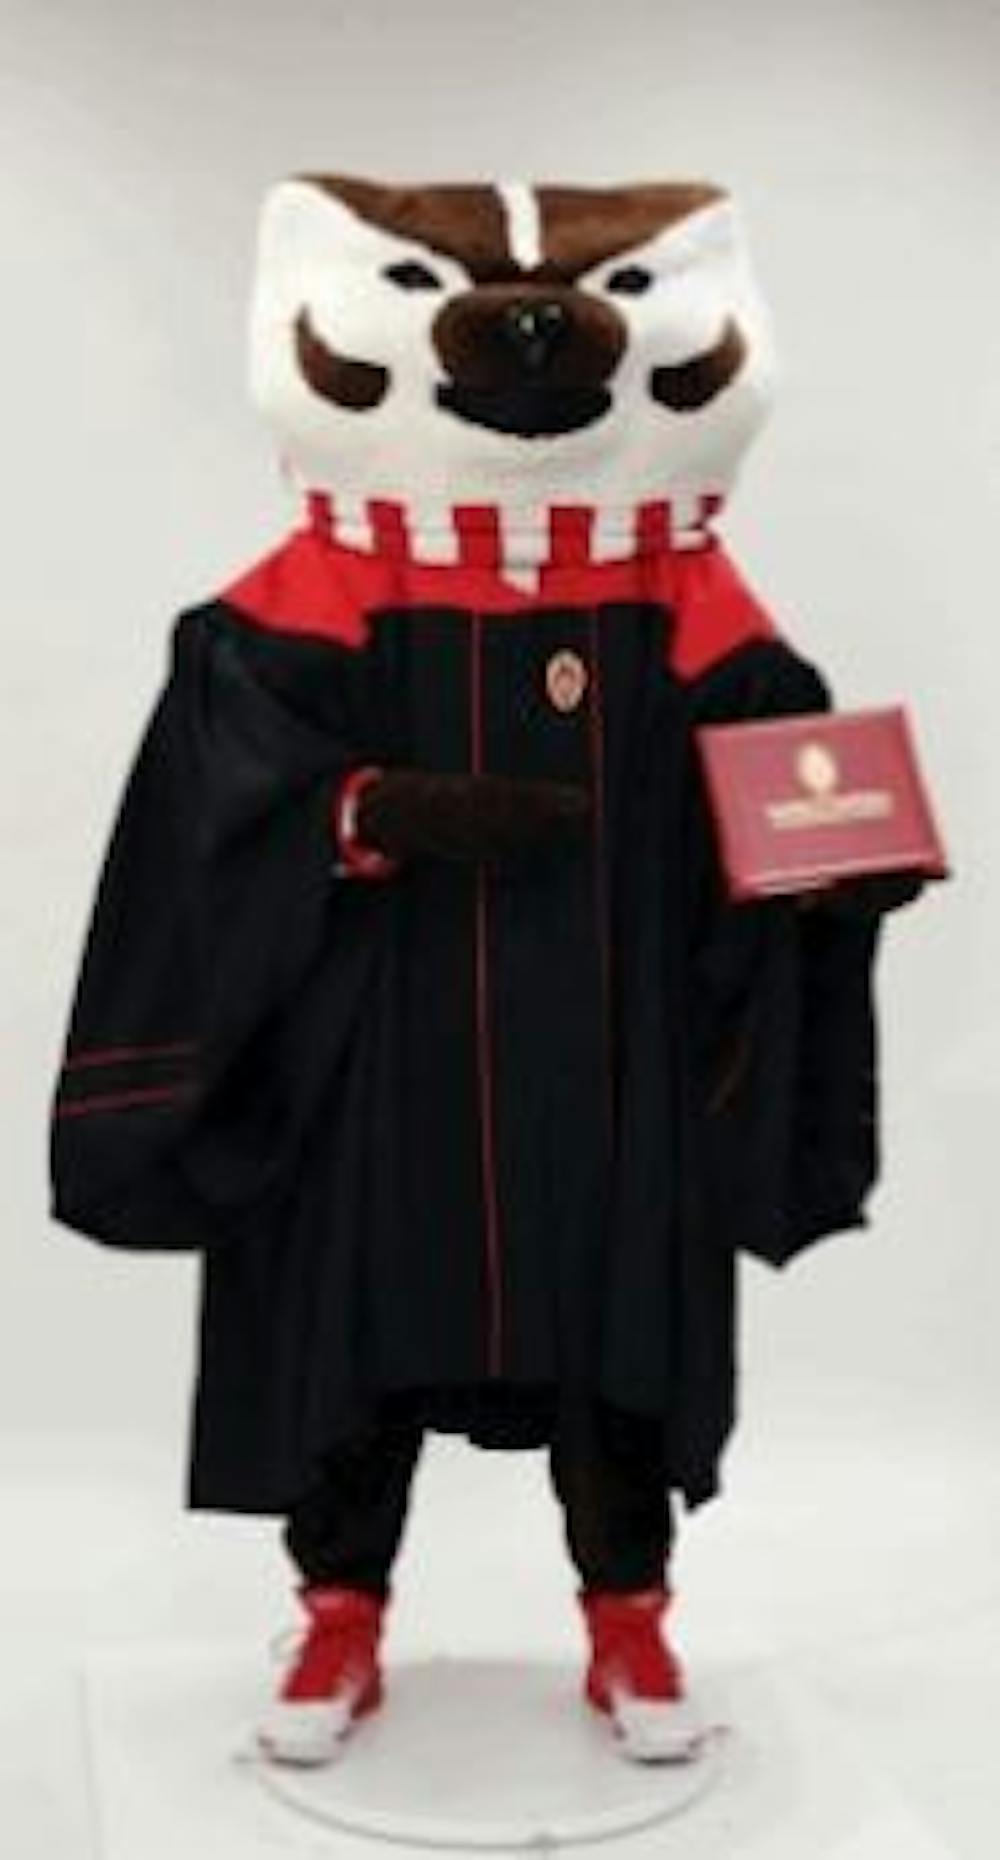 Bucky Badger models the new undergraduate commencement gown.